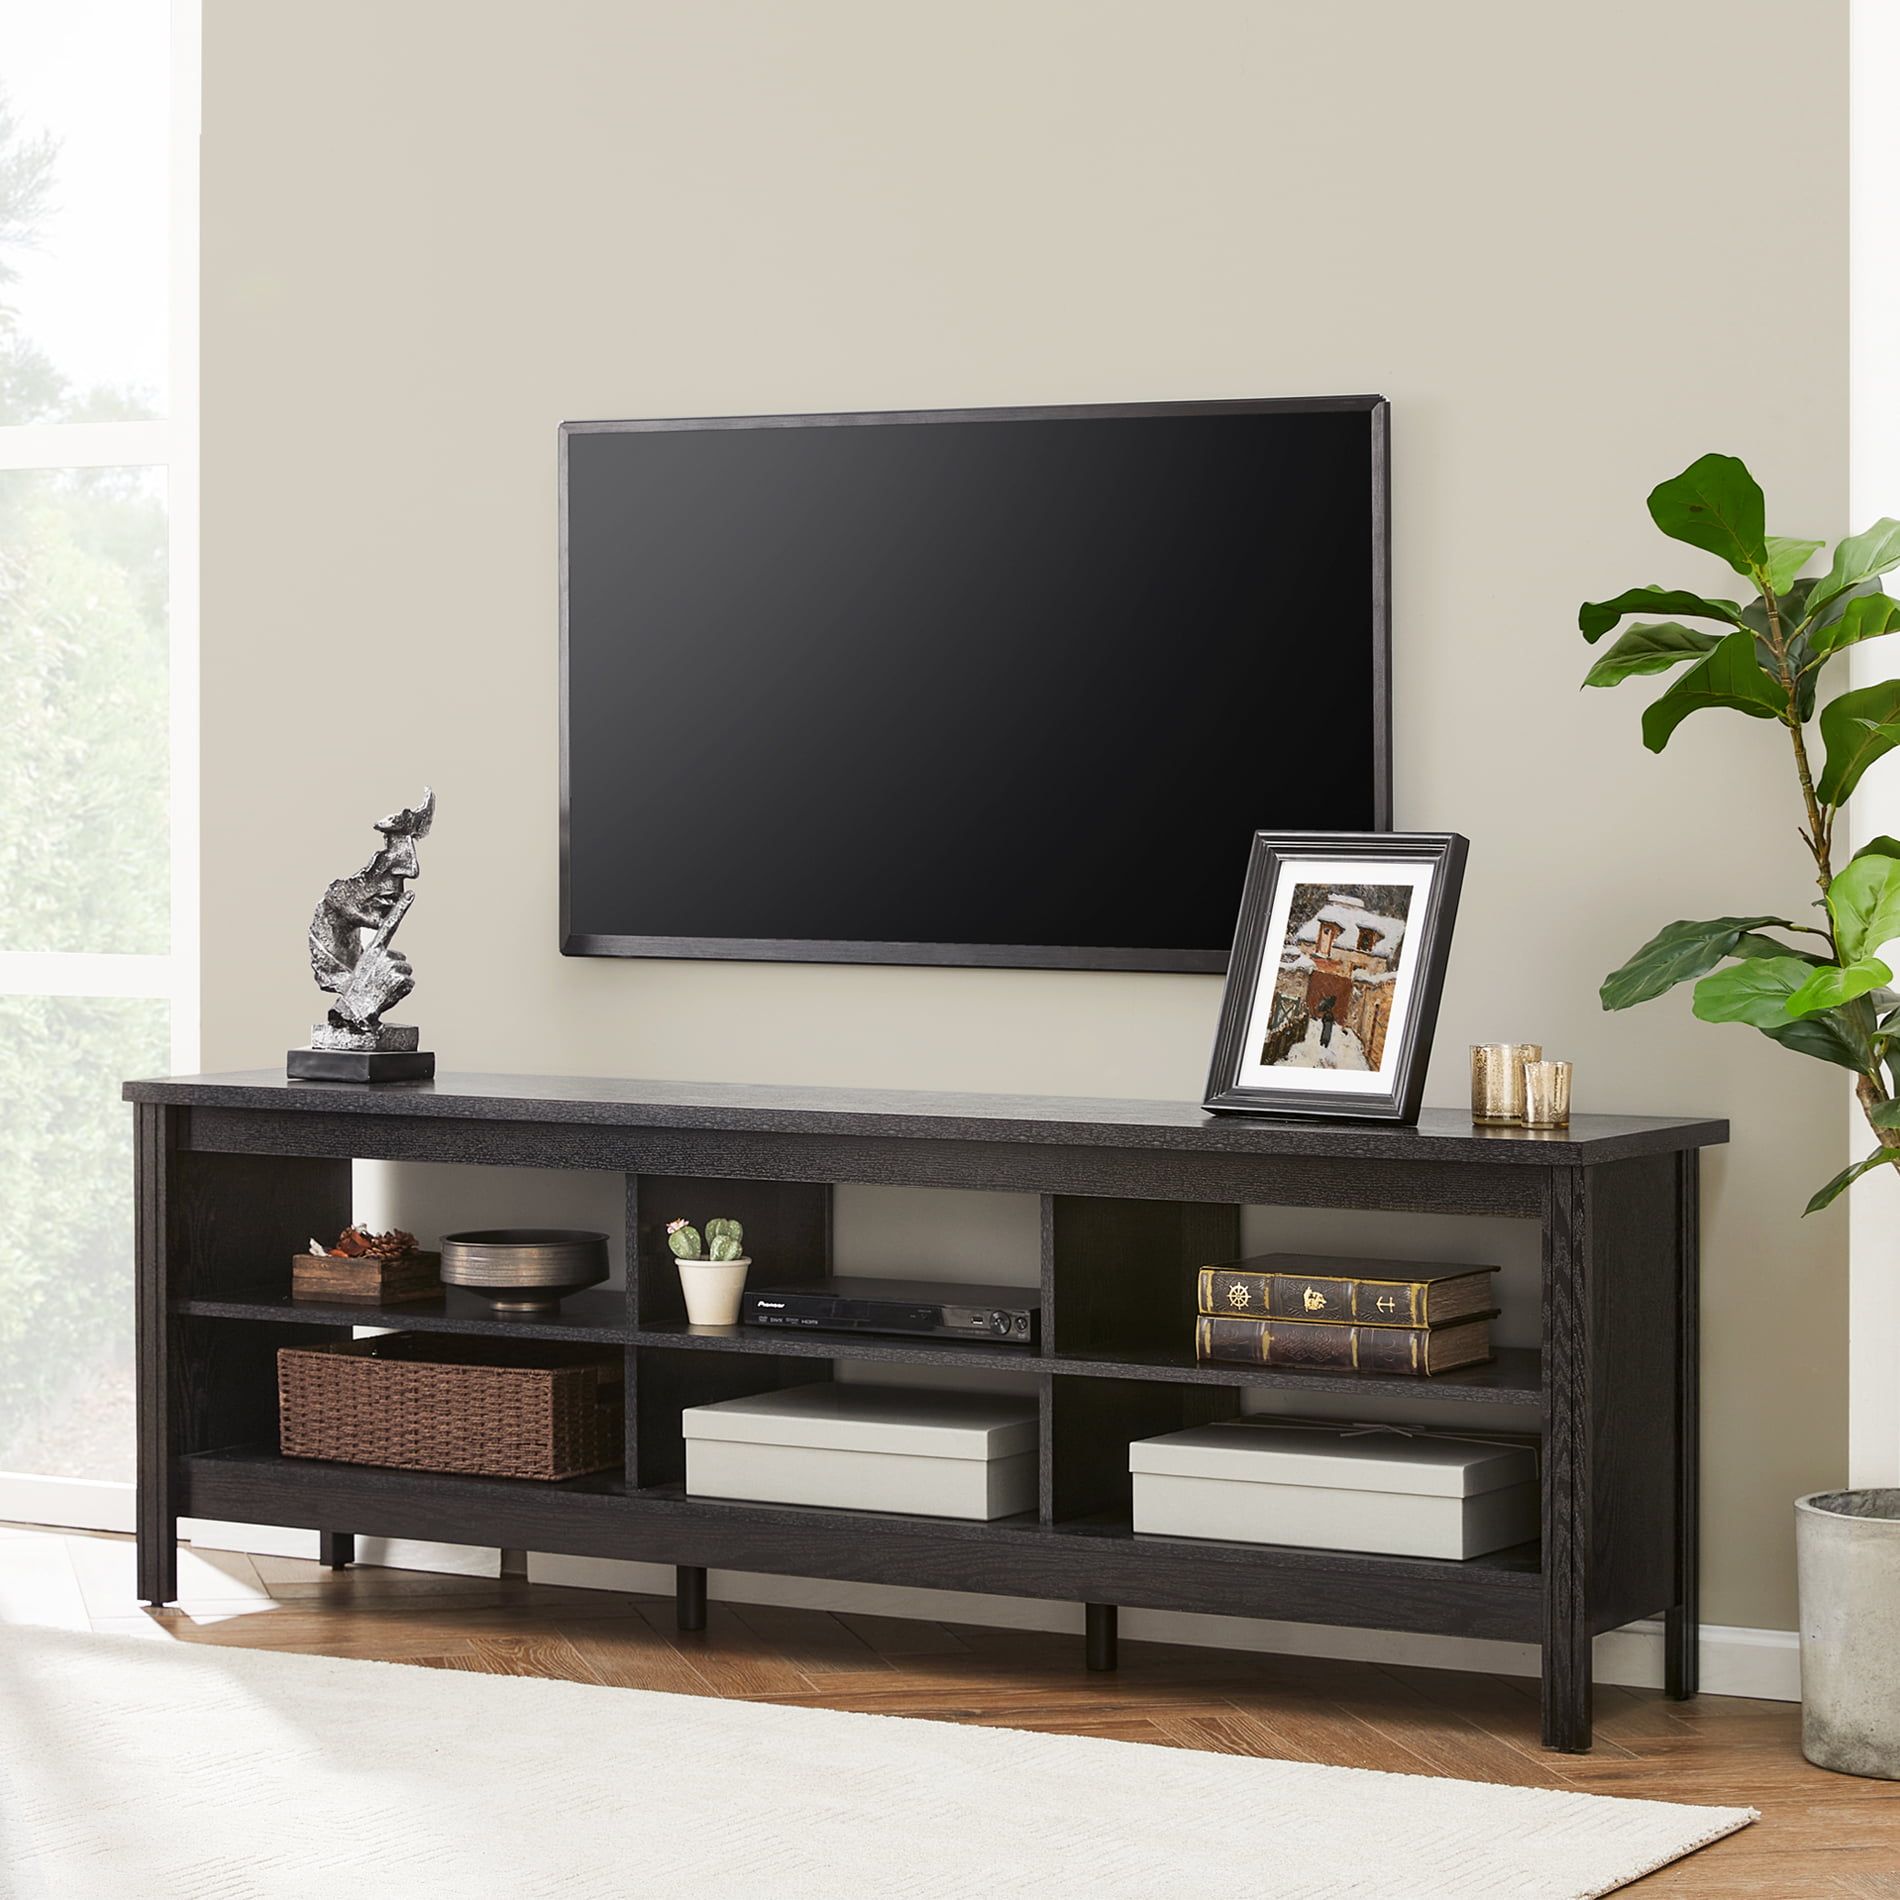 Farmhouse Tv Stands For 75 Inch Flat Screen Media Console Storage Regarding Dual Use Storage Cabinet Tv Stands (Gallery 13 of 20)